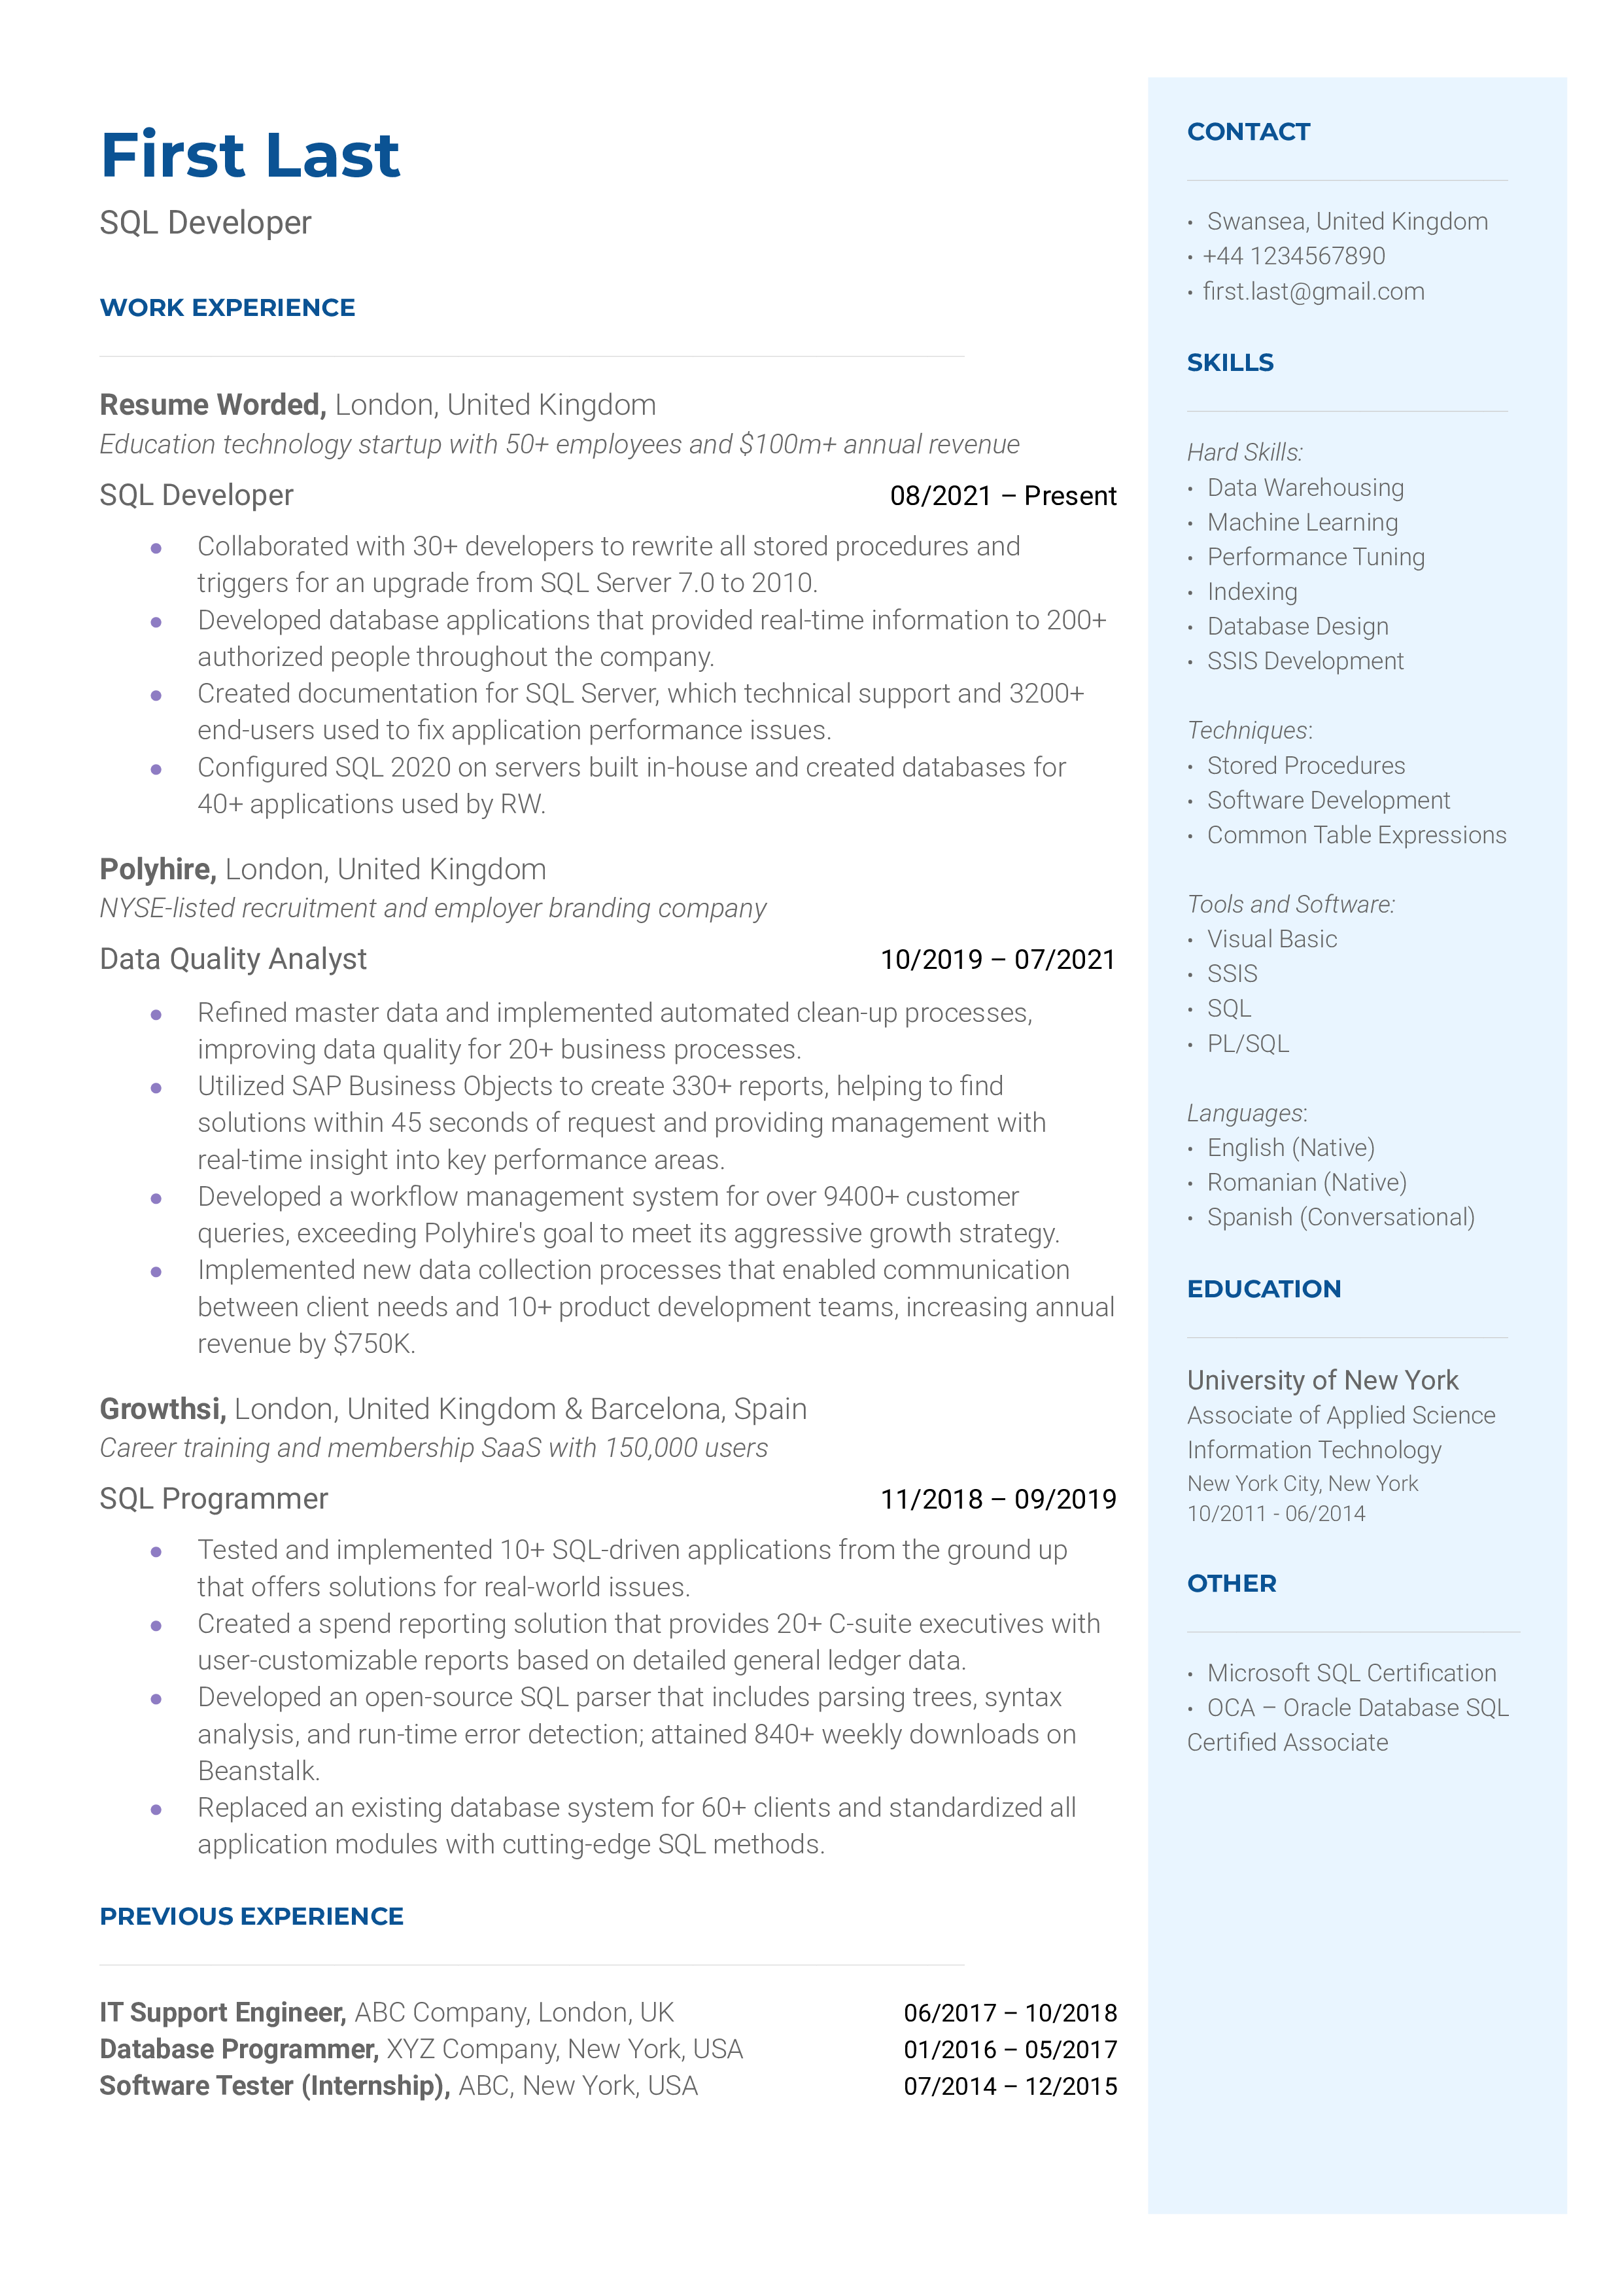 A sample CV for an SQL Developer role showcasing the applicant's skills, experience, and successful projects.